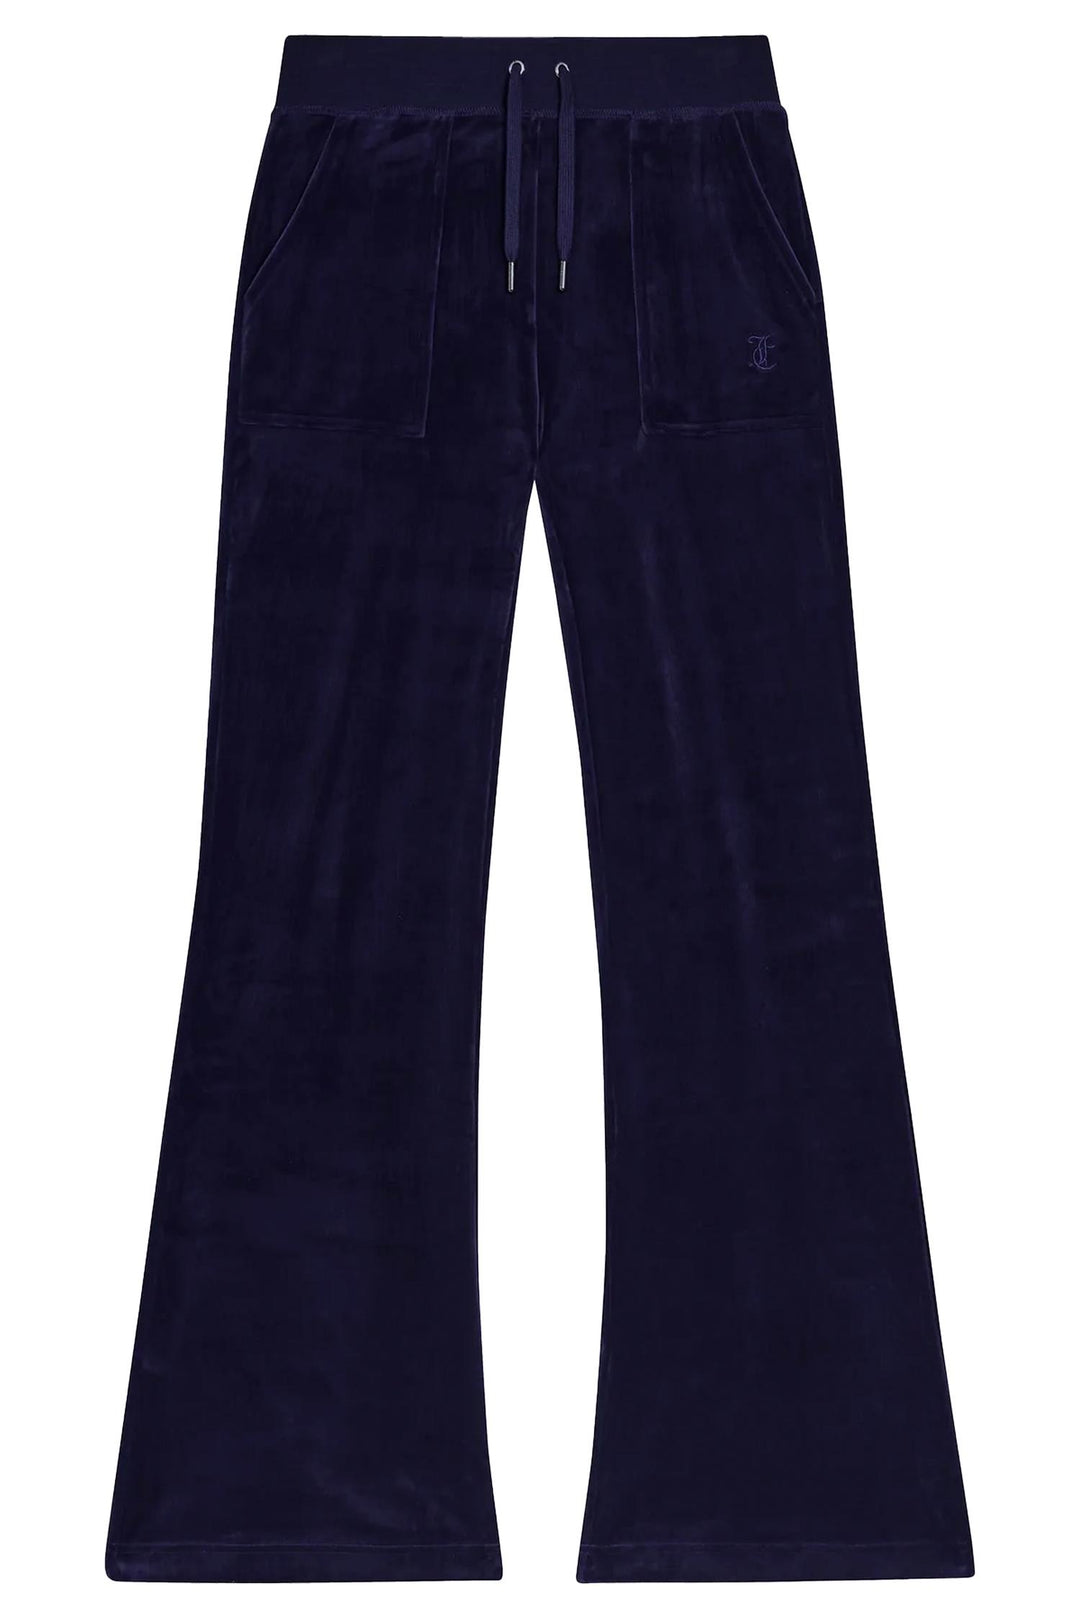 Layla Low Rise Pocketed Velour Pant Night Sky